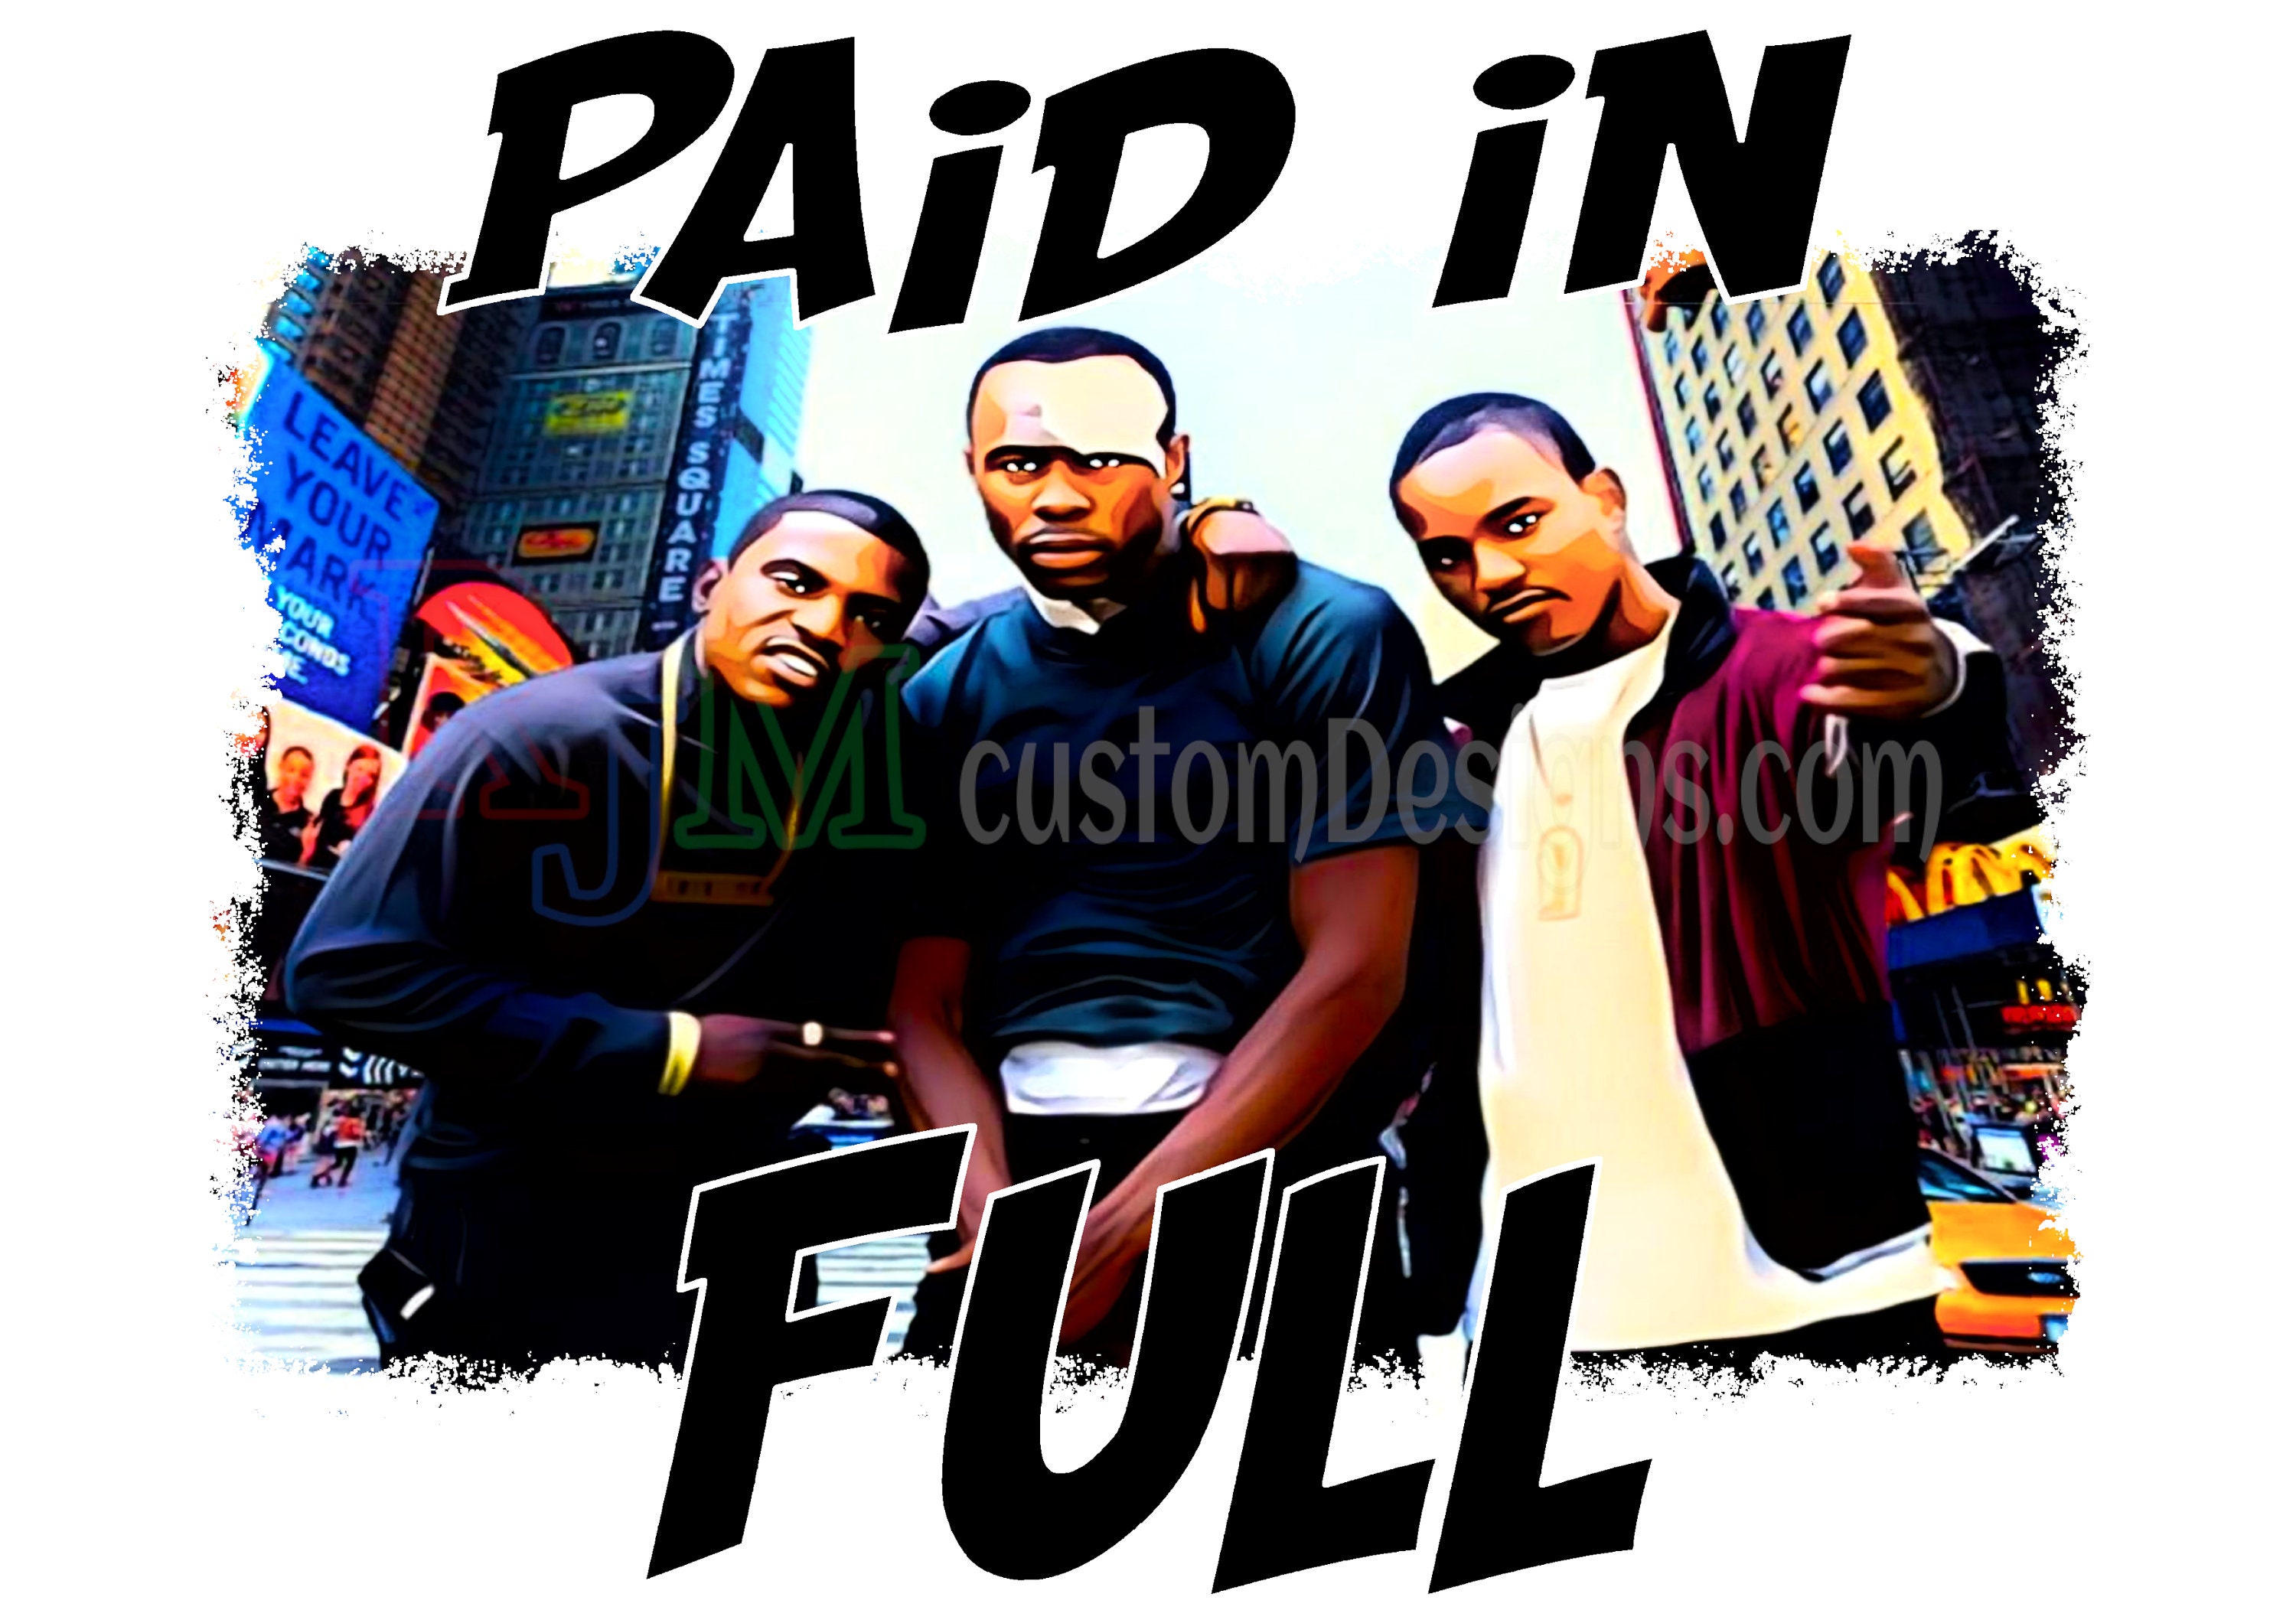 Mitch paid in full shirt. Paid in full tee